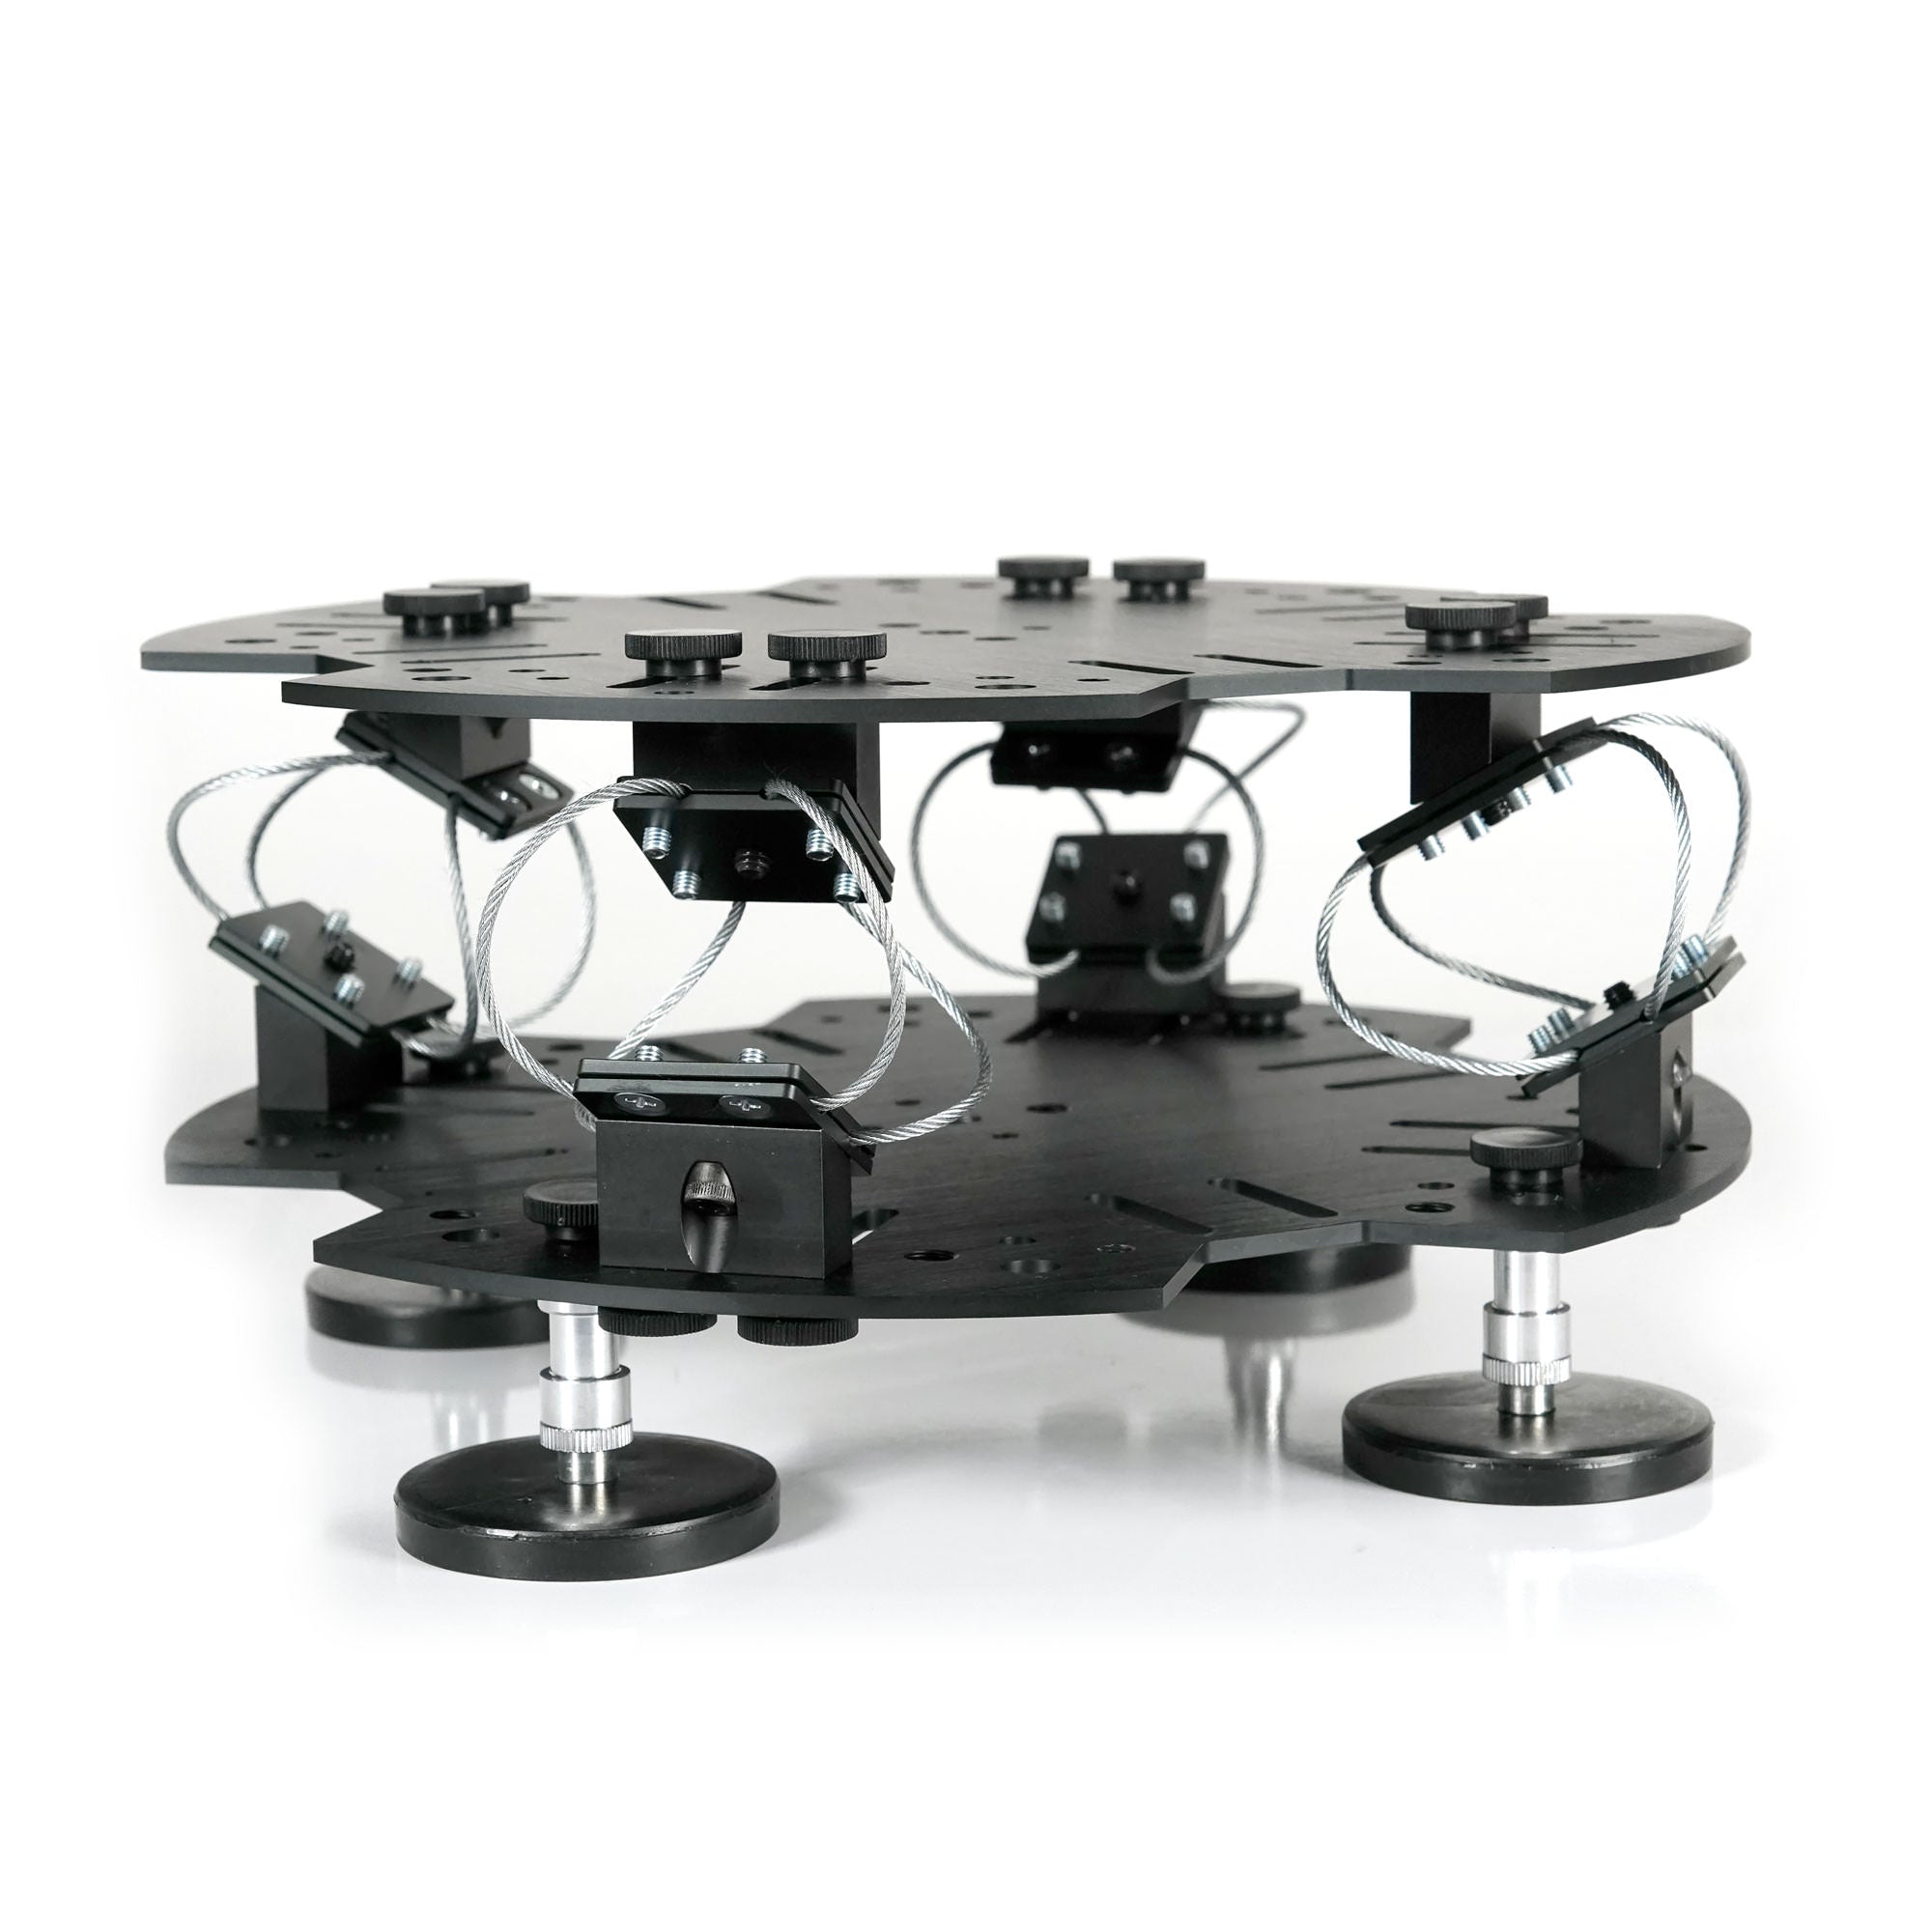 Modus Camera Mounting System III - 2 Platforms with 4 Magnets and 4 Wire Sets